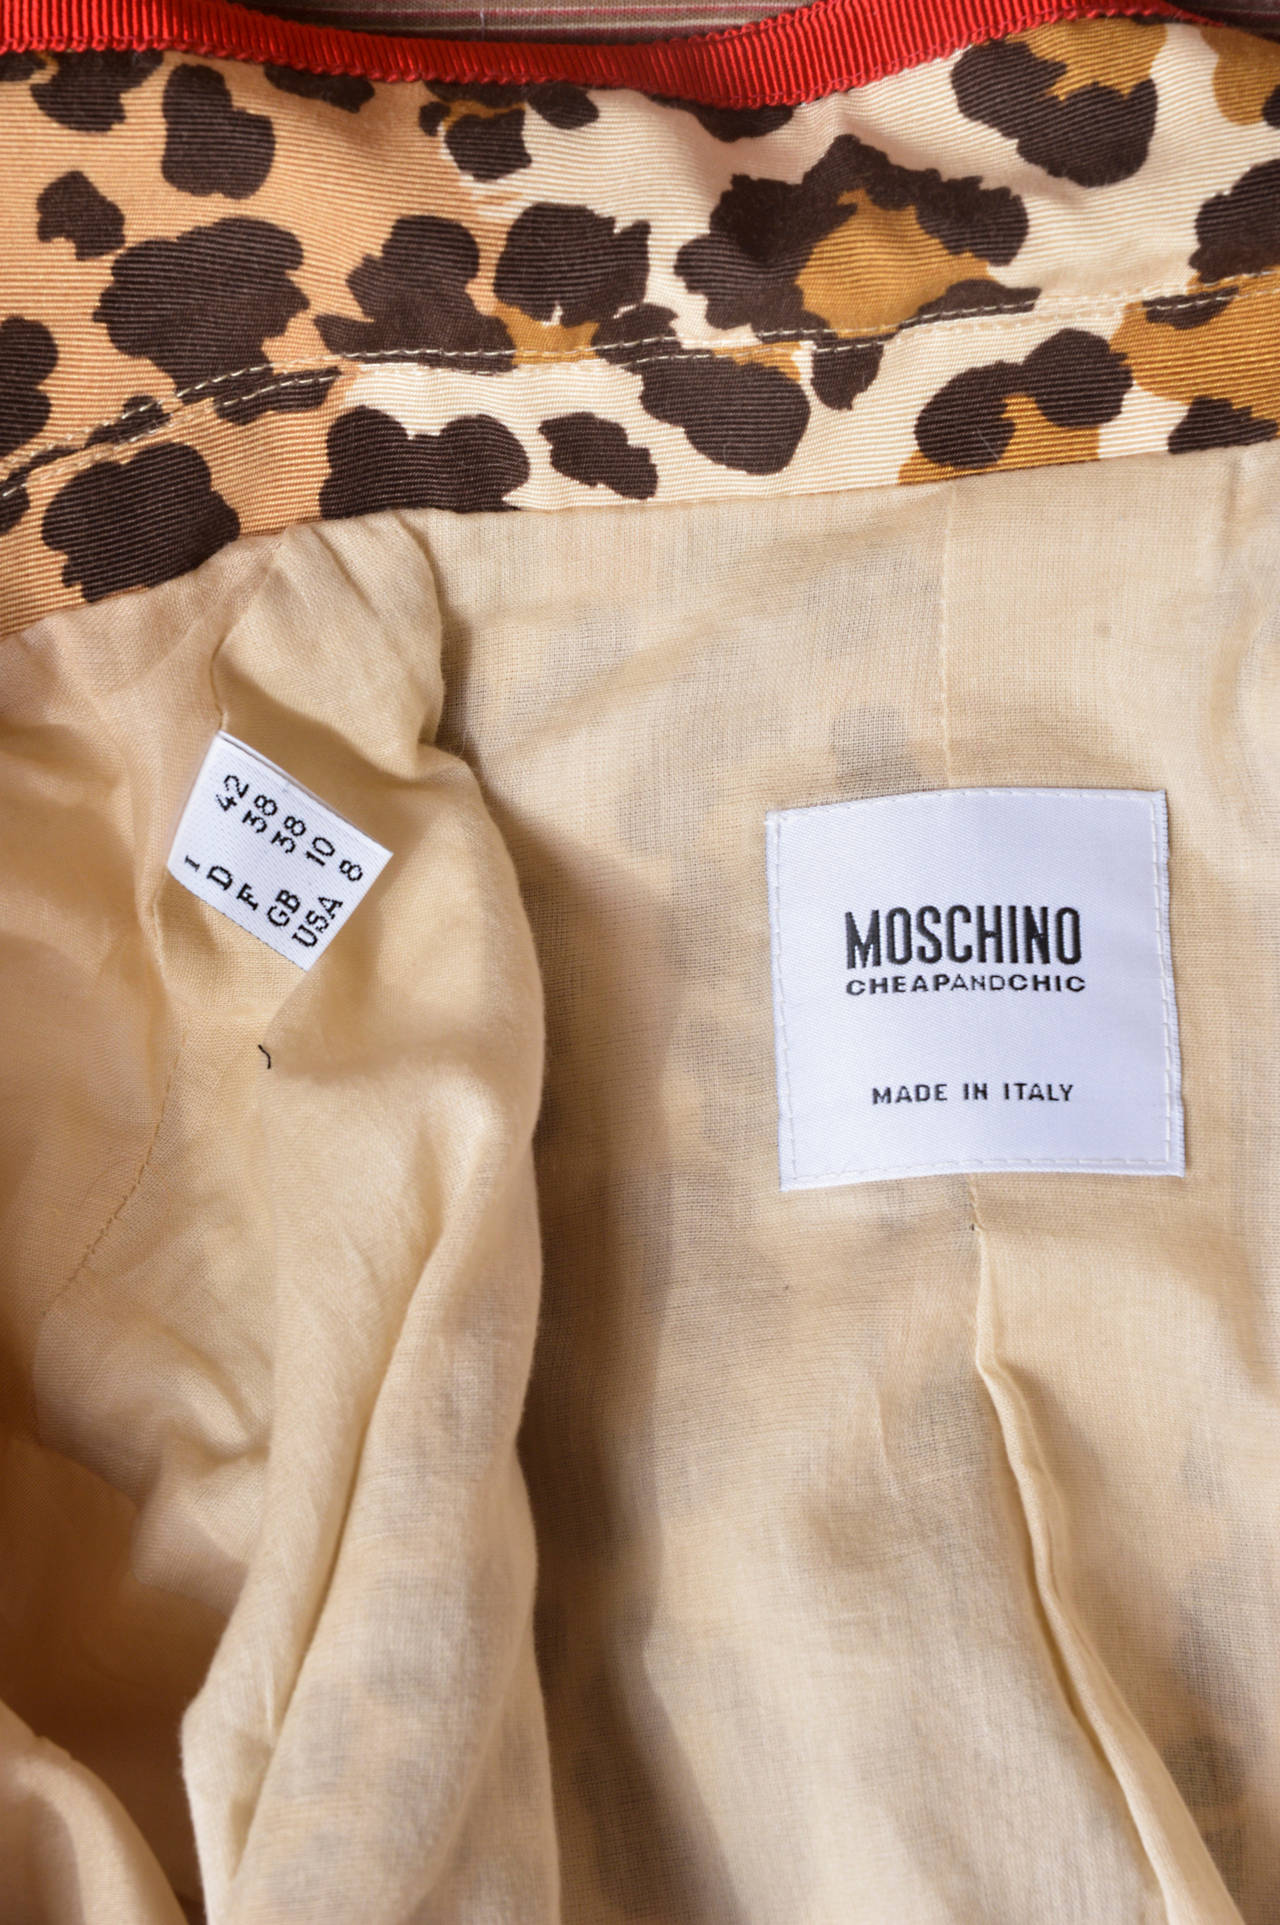 Moschino Cheap & Chic Leopard Print Jacket In Excellent Condition In Oakland, CA